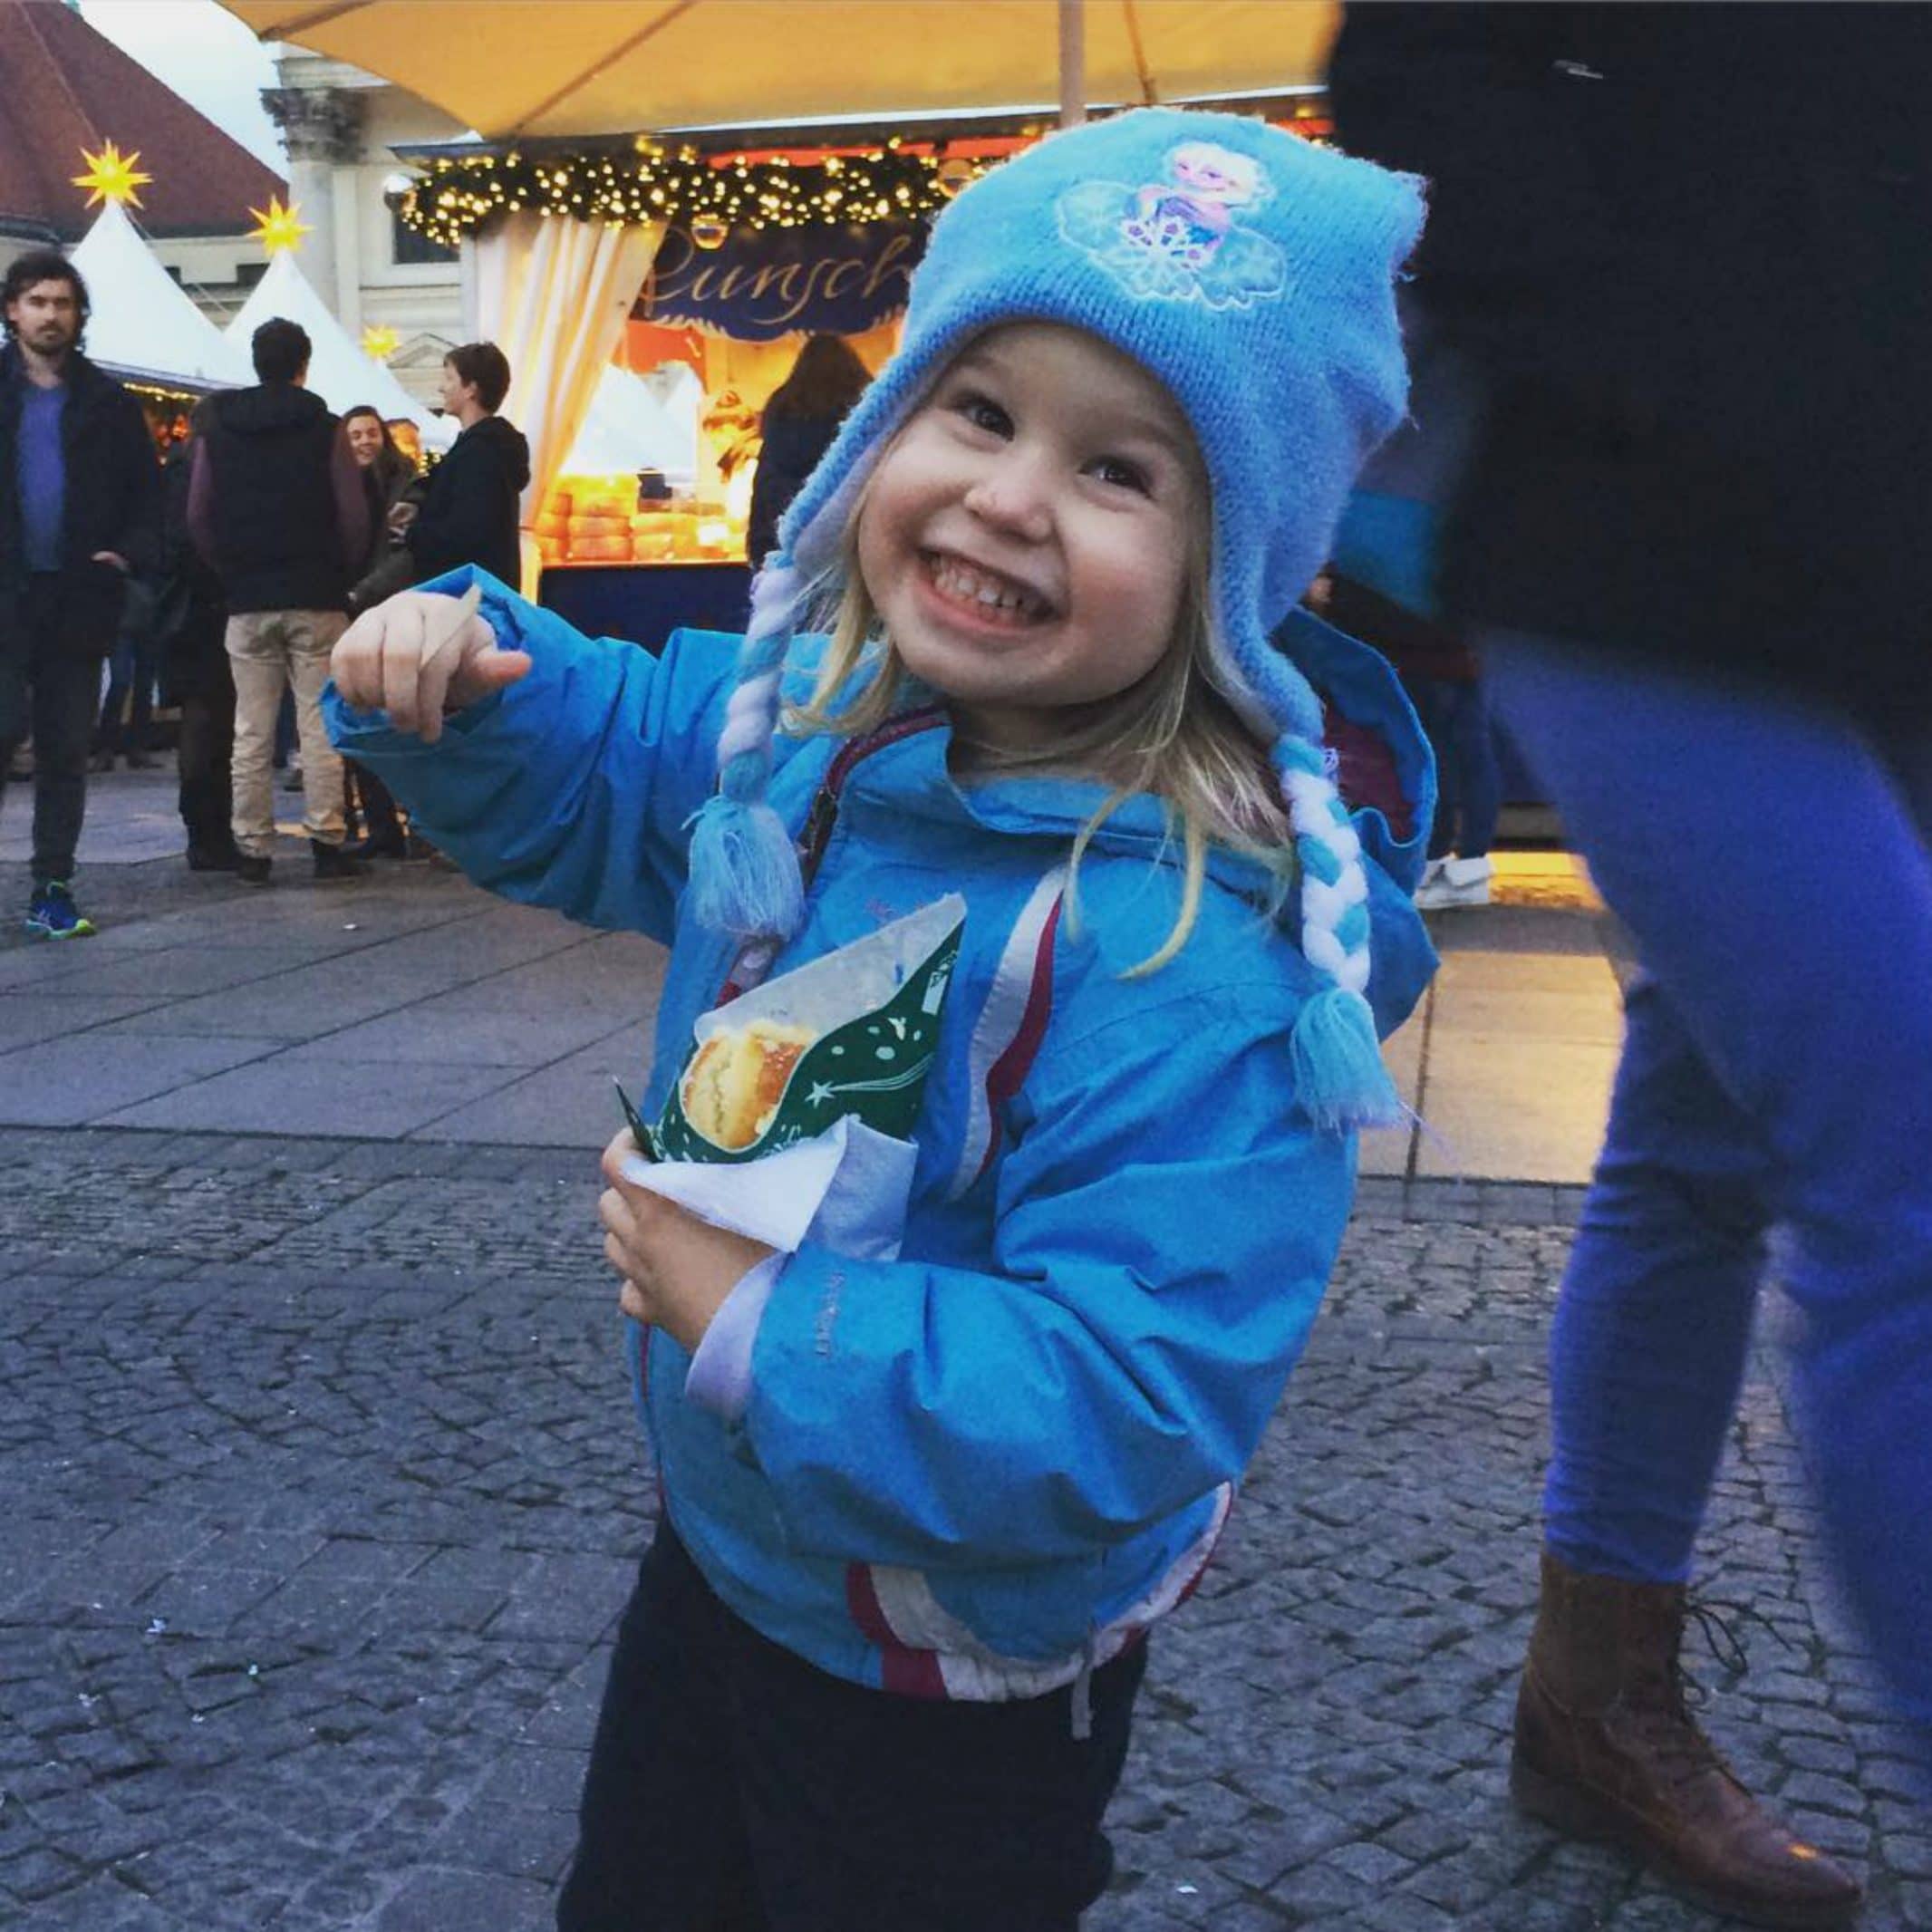 Berlin Christmas markets with kids